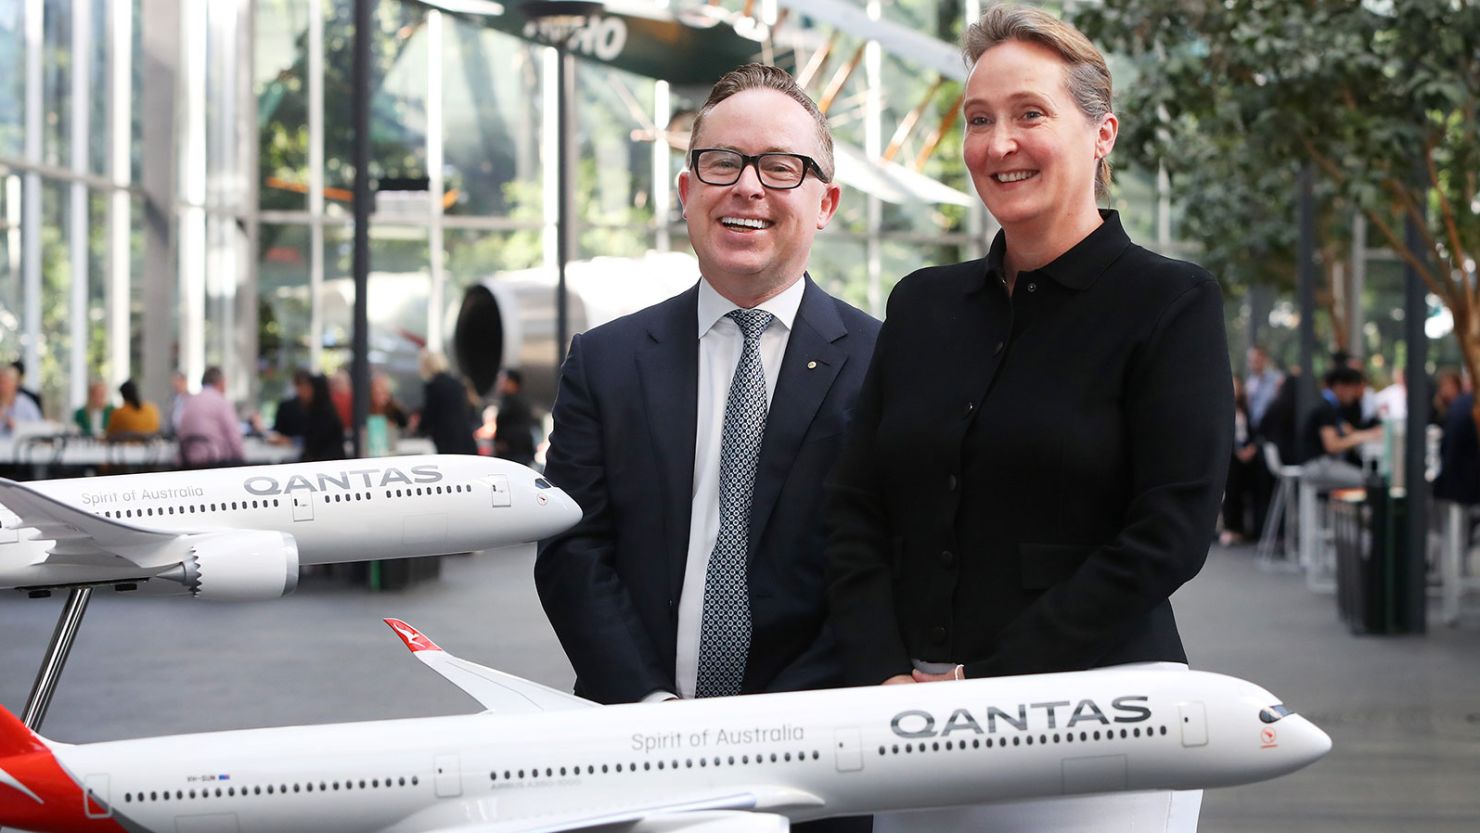 Alan Joyce, CEO of Qantas, left, will retire early. He will be replaced by Vanessa Hudson, right, who is the chief executive officer-designate of the airline. 